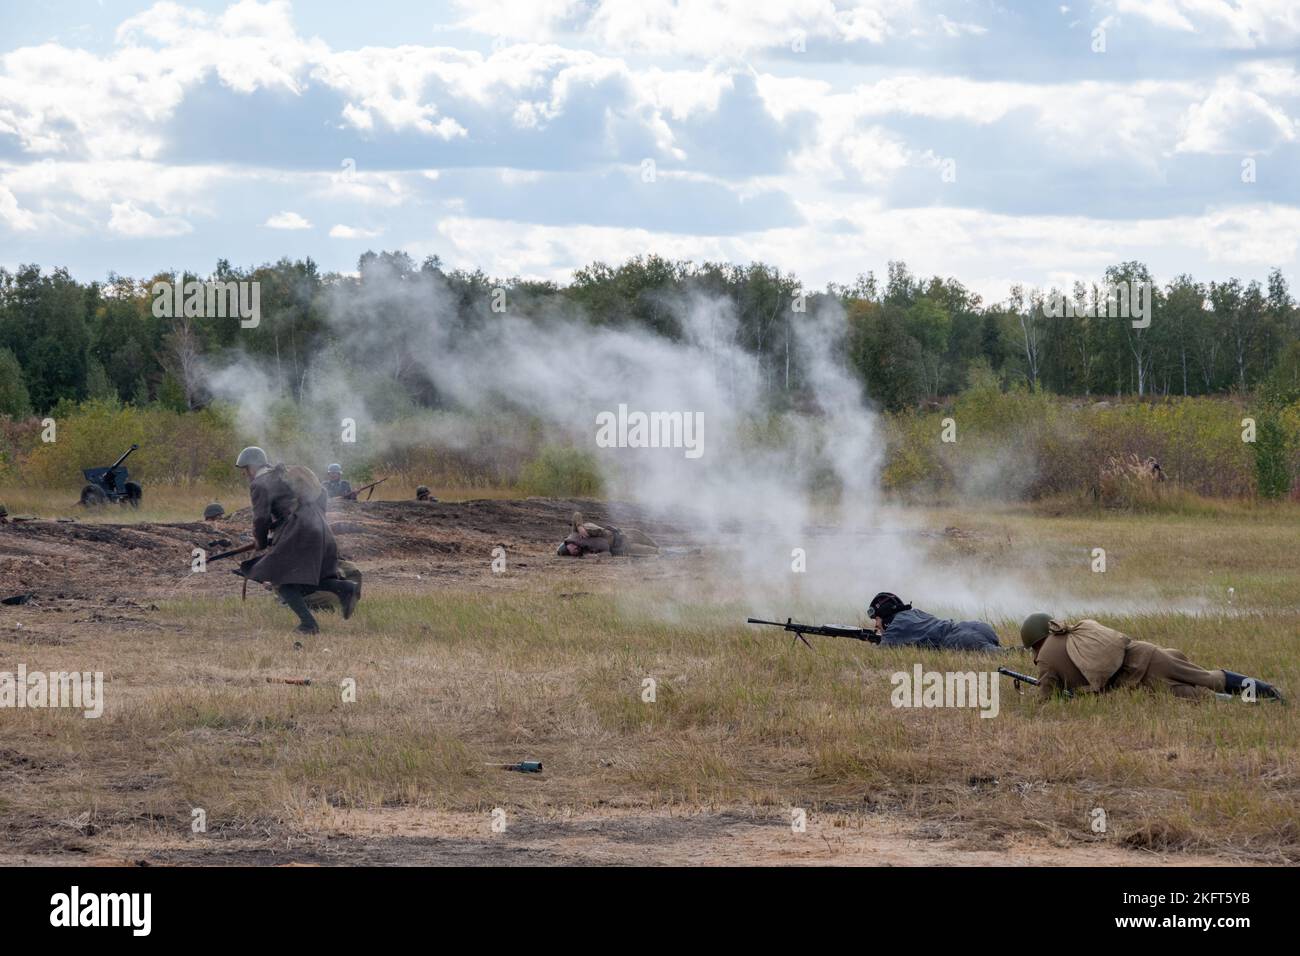 Battle of Soviet and German soldiers. Attack of Soviet soldiers. Smoke from smoke bombs. Reconstruction of the battle of World War II. Russia, Chelyab Stock Photo